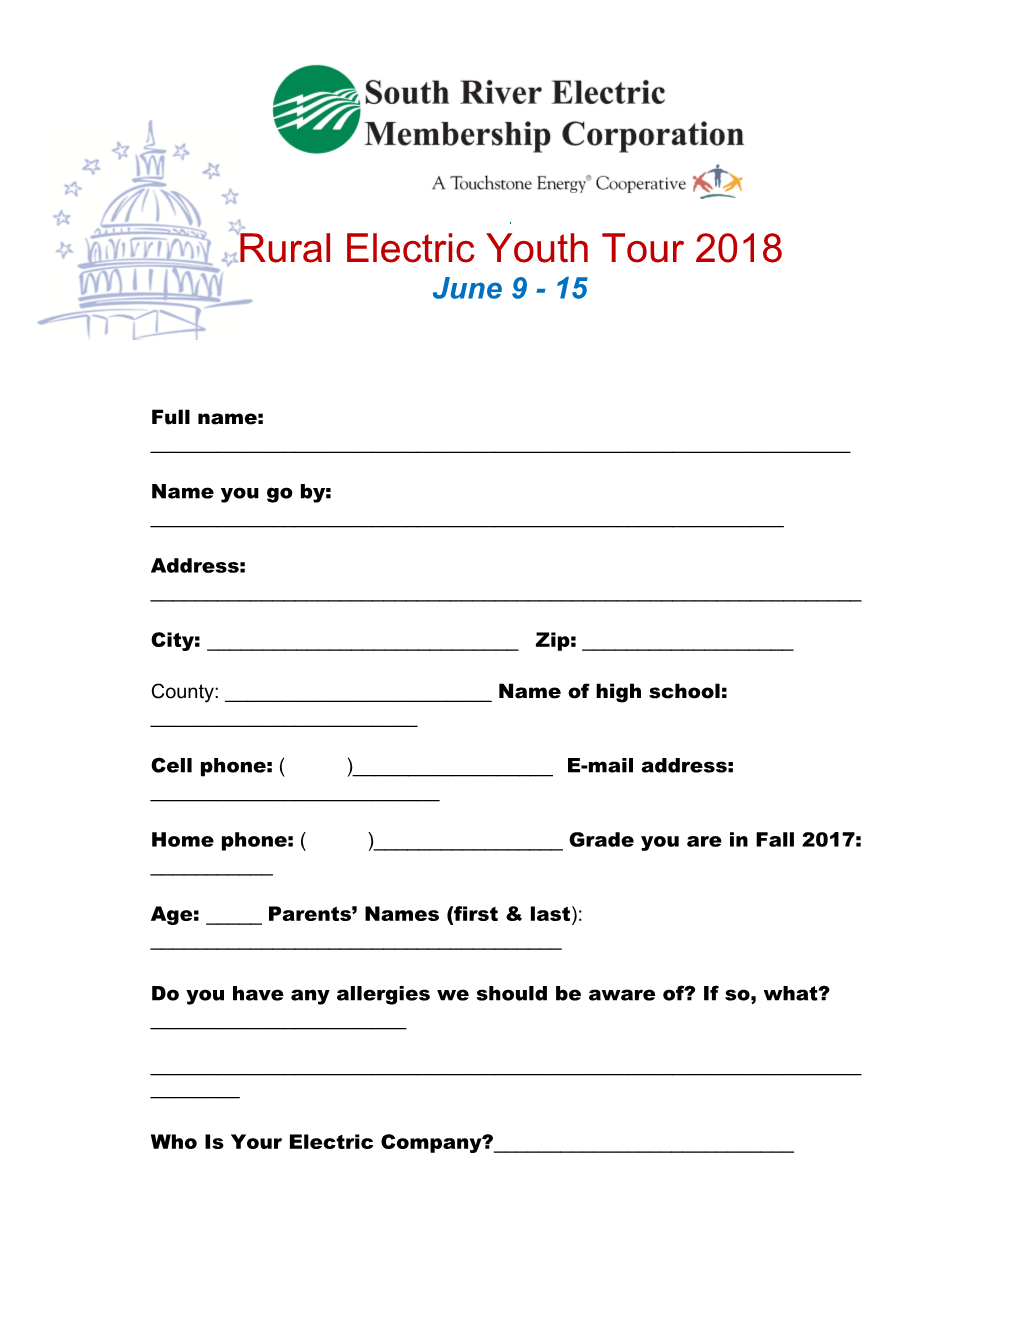 Rural Electric Youth Tour 2018